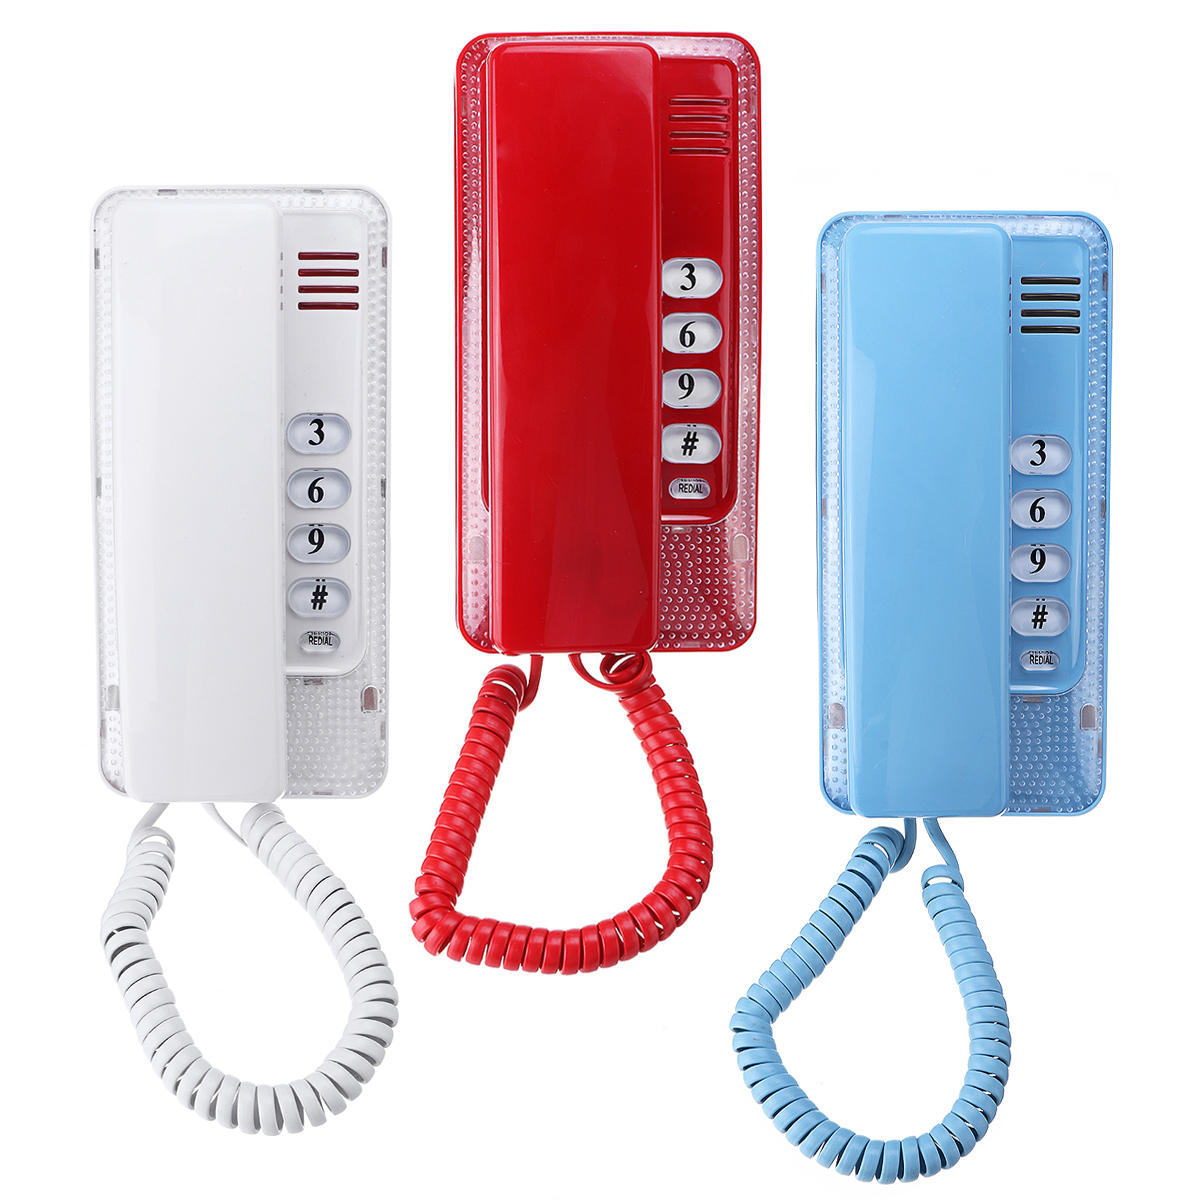 

Wall Mount Home Corded Fixed Phone Landline Telephone Business Home Office Desktop Phone